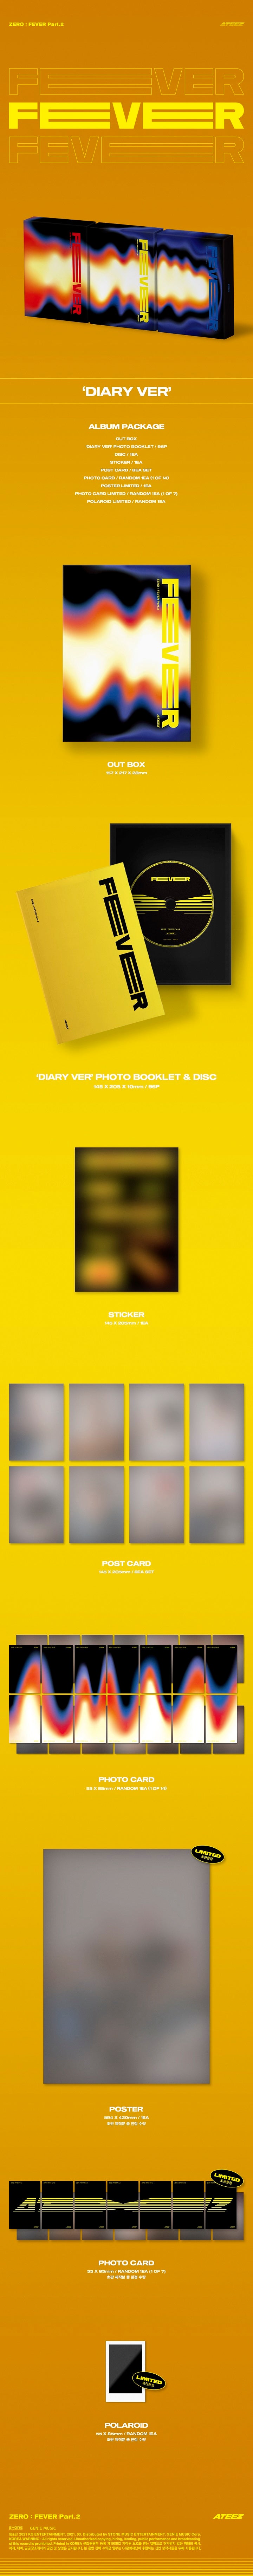 1 CD
1 Photo Booklet (96 pages)
1 Sticker
1 Postcard Set (8 cards)
1 Photo Card (random out of 14 types)